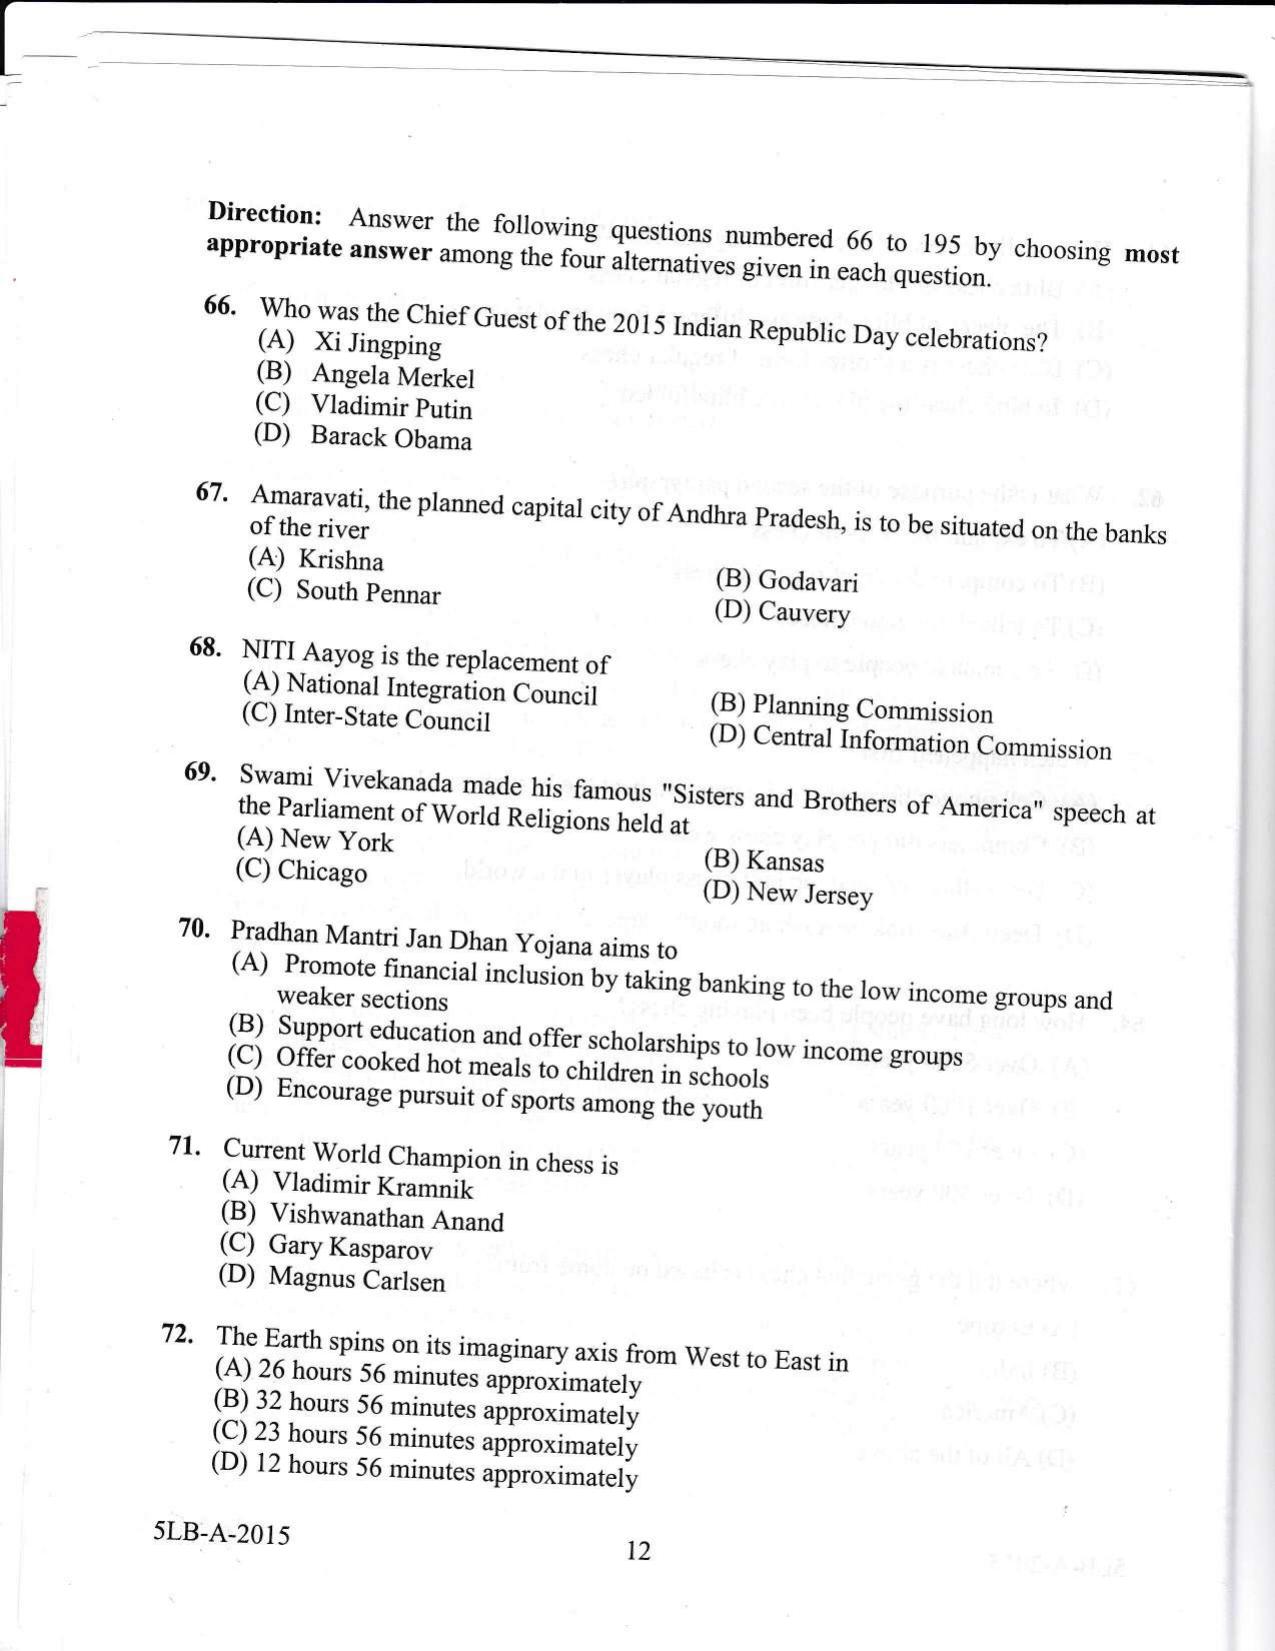 KLEE 5 Year LLB Exam 2015 Question Paper - Page 12